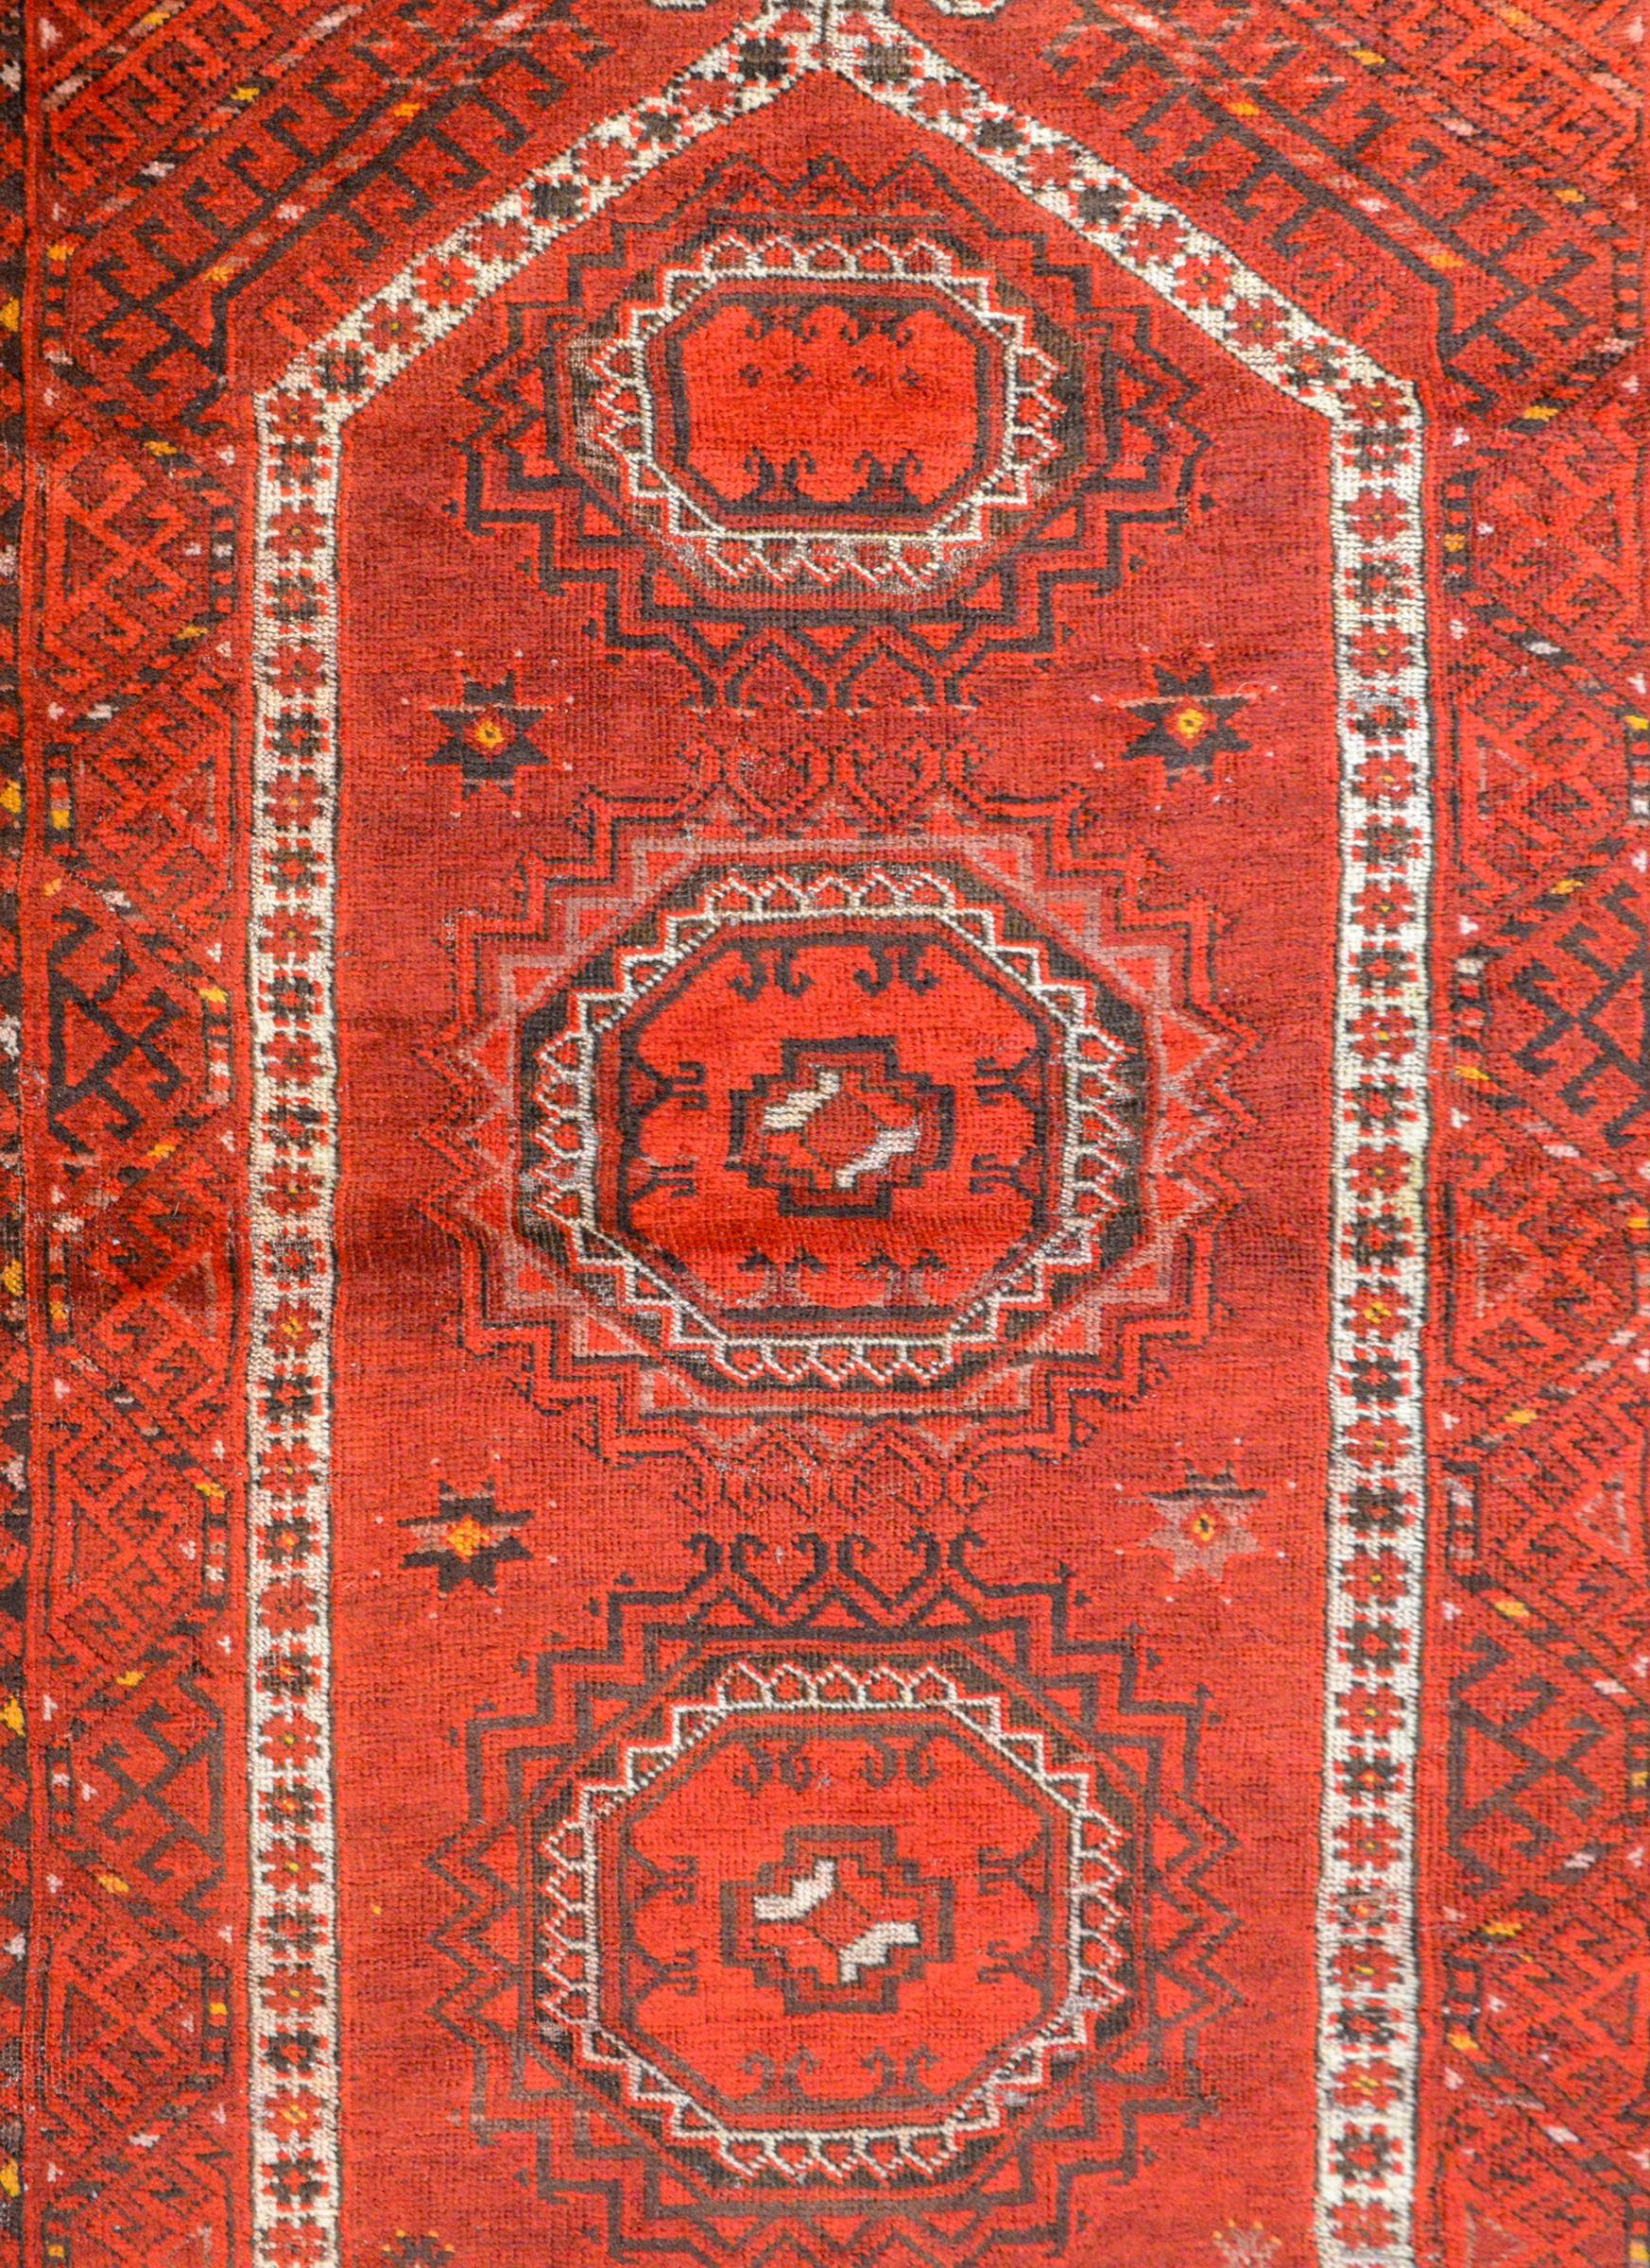 A charming early 20th century Afghan Ersari Prayer Rug with three octagonal medallions on a crimson background with geometric patterned halos amidst a field of stylized flowers. The border is wide with a fantastic tone on tone geometric pattern.